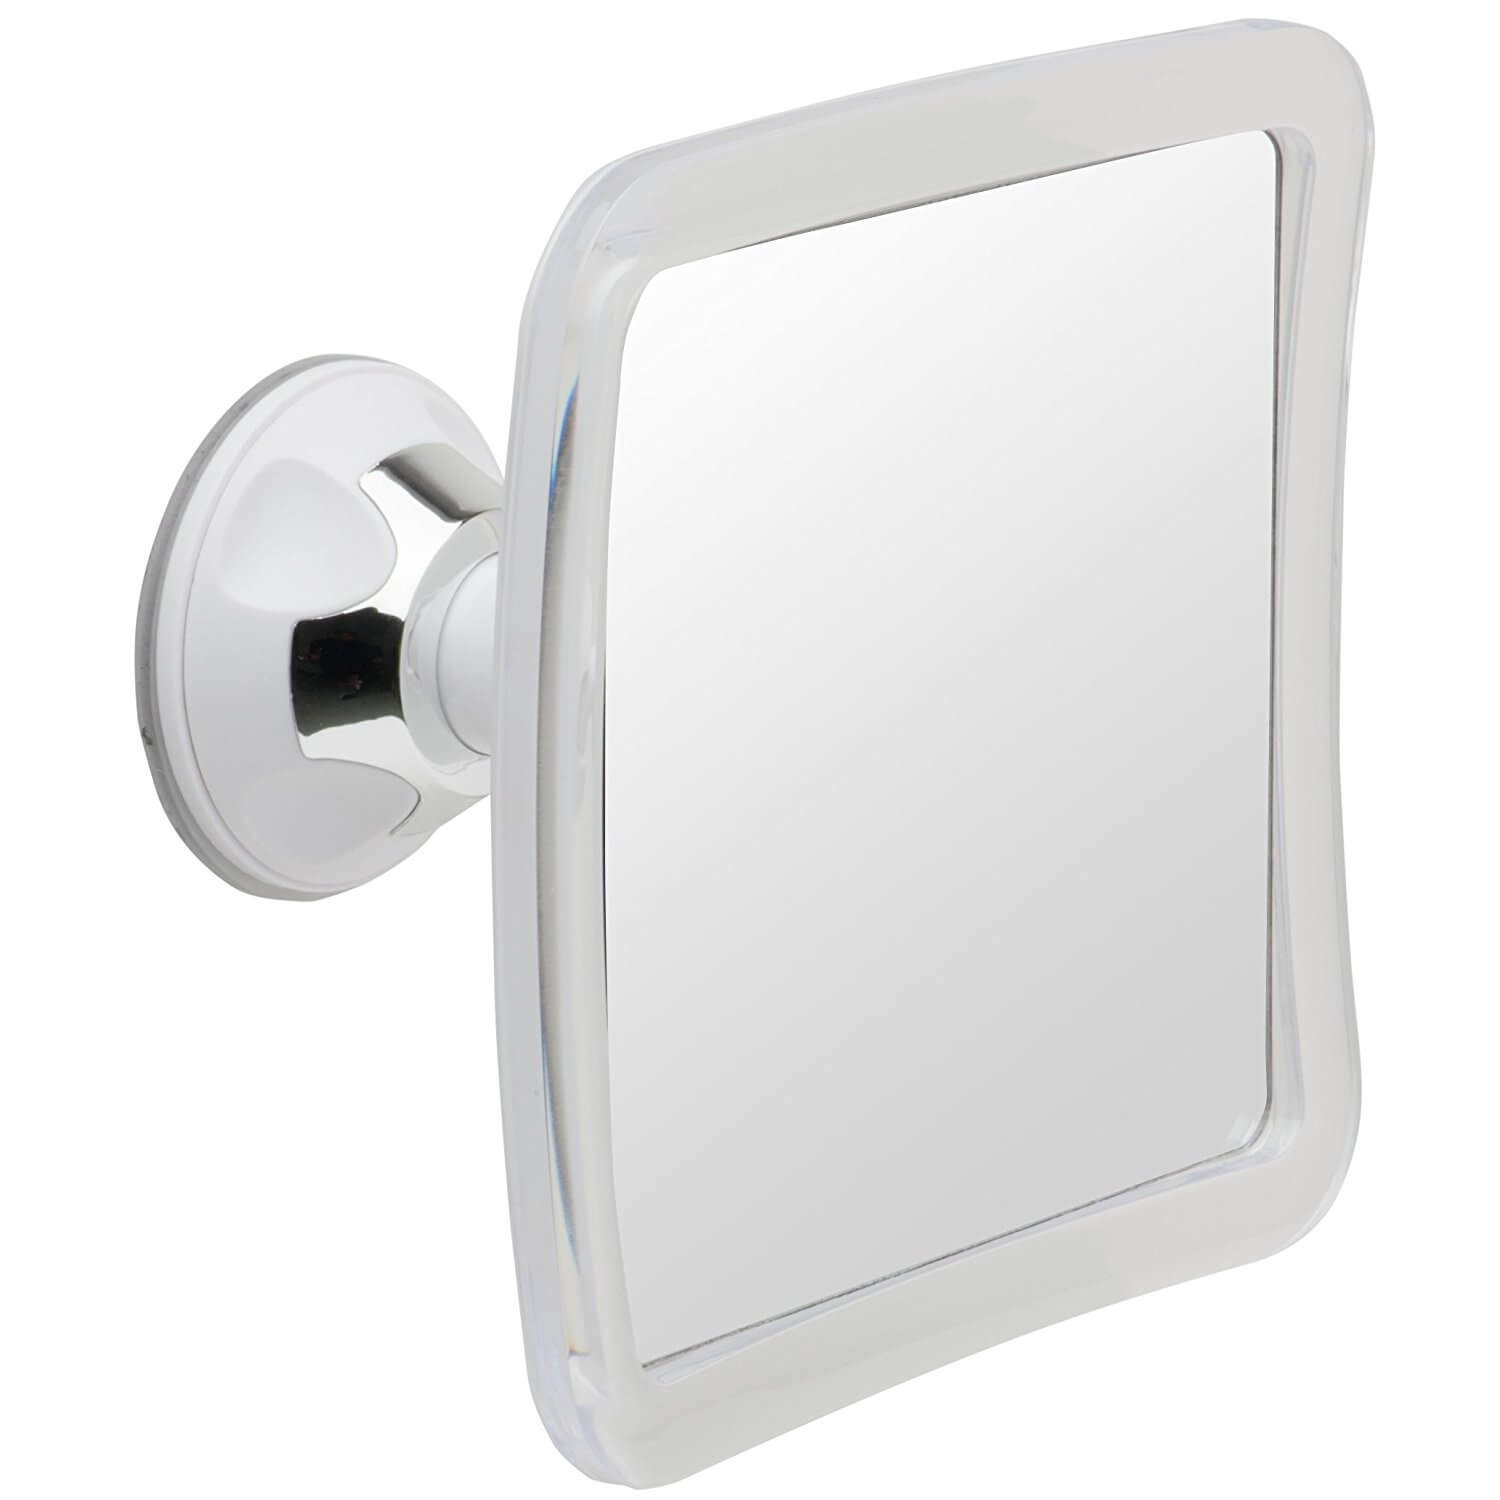 Mirrorvana Fogless Shower Mirror with Lock Suction-Cup, 6.3 x 6.3 Inch